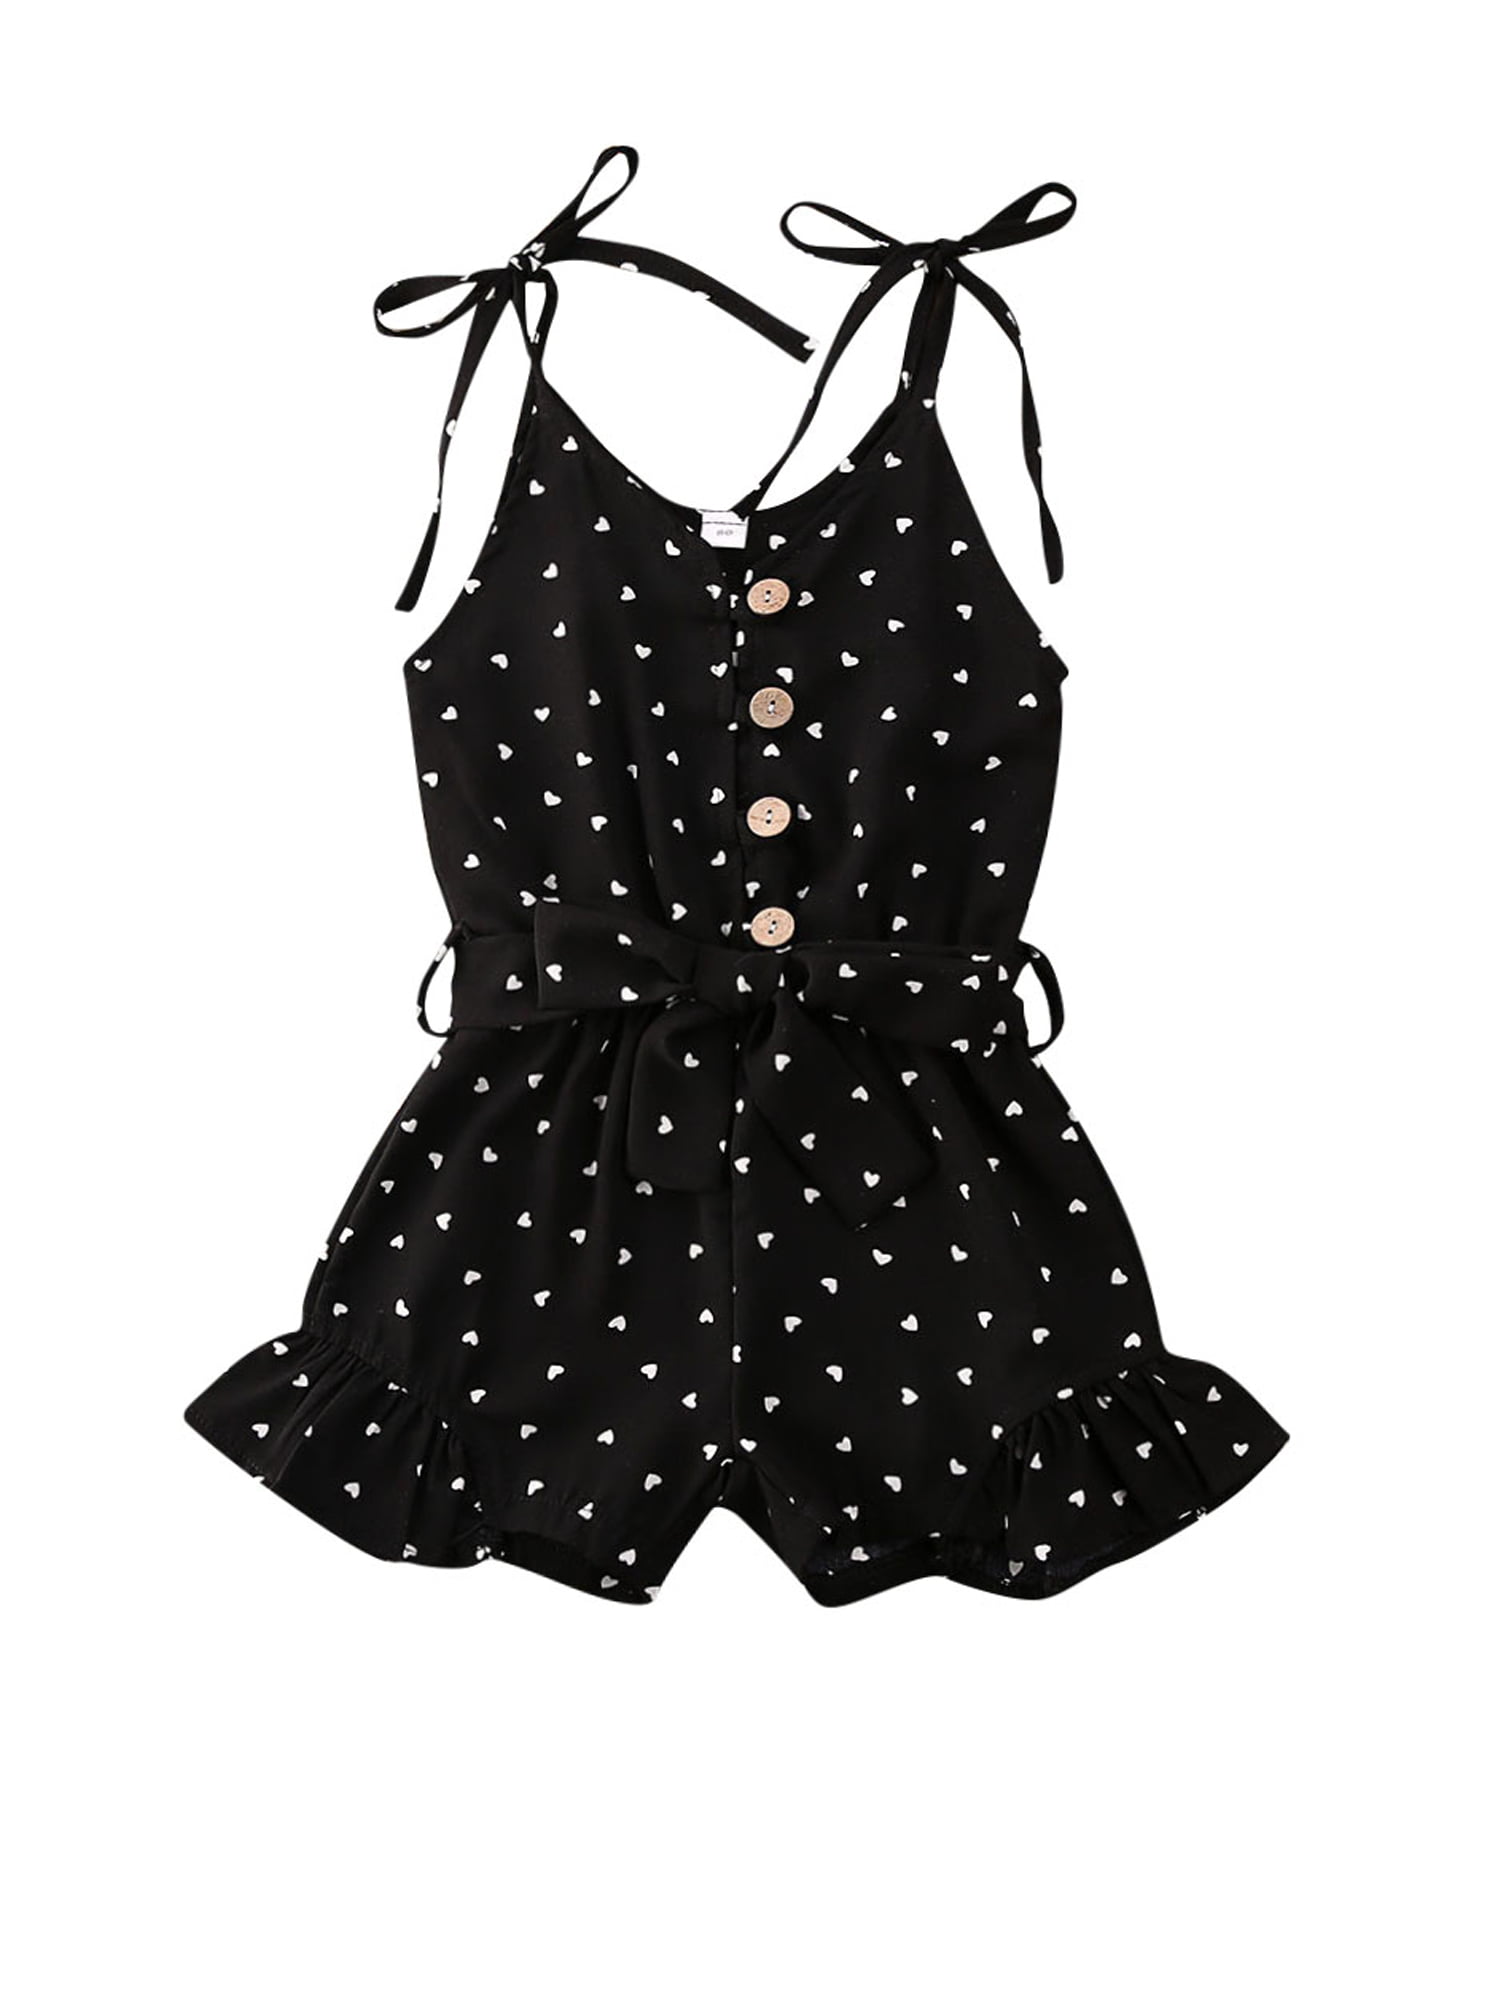 Toddler Baby Girl Polka dot Jumpsuit Floral Playsuit Sleeveless Bodysuit Clothes